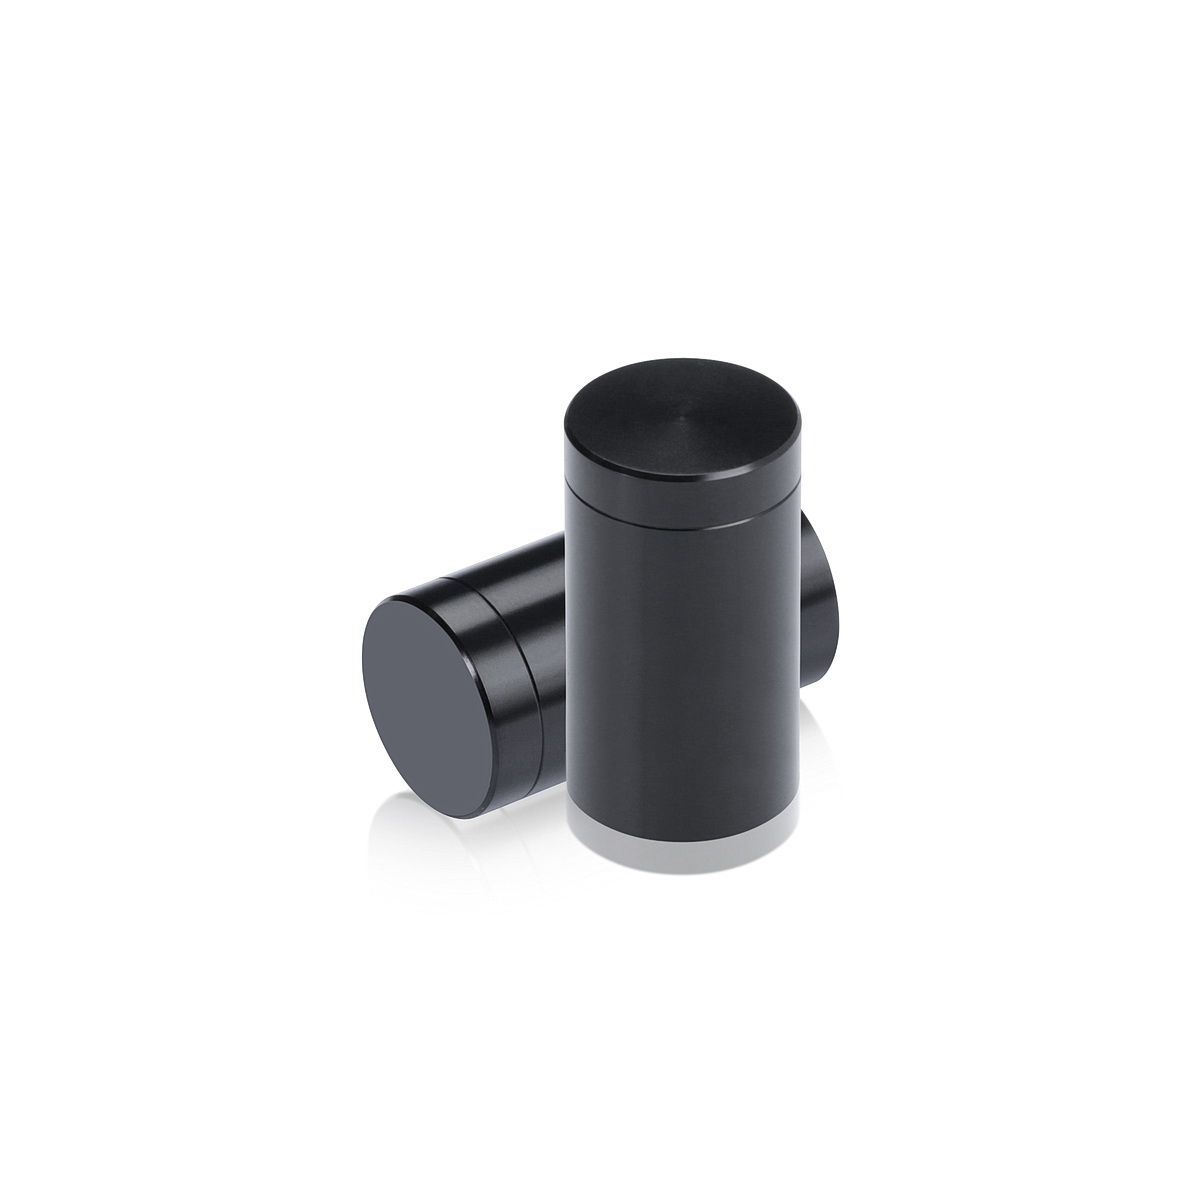 5/8'' Diameter X 1'' Barrel Length, Affordable Aluminum Standoffs, Black Anodized Finish Easy Fasten Standoff (For Inside / Outside use) [Required Material Hole Size: 7/16'']